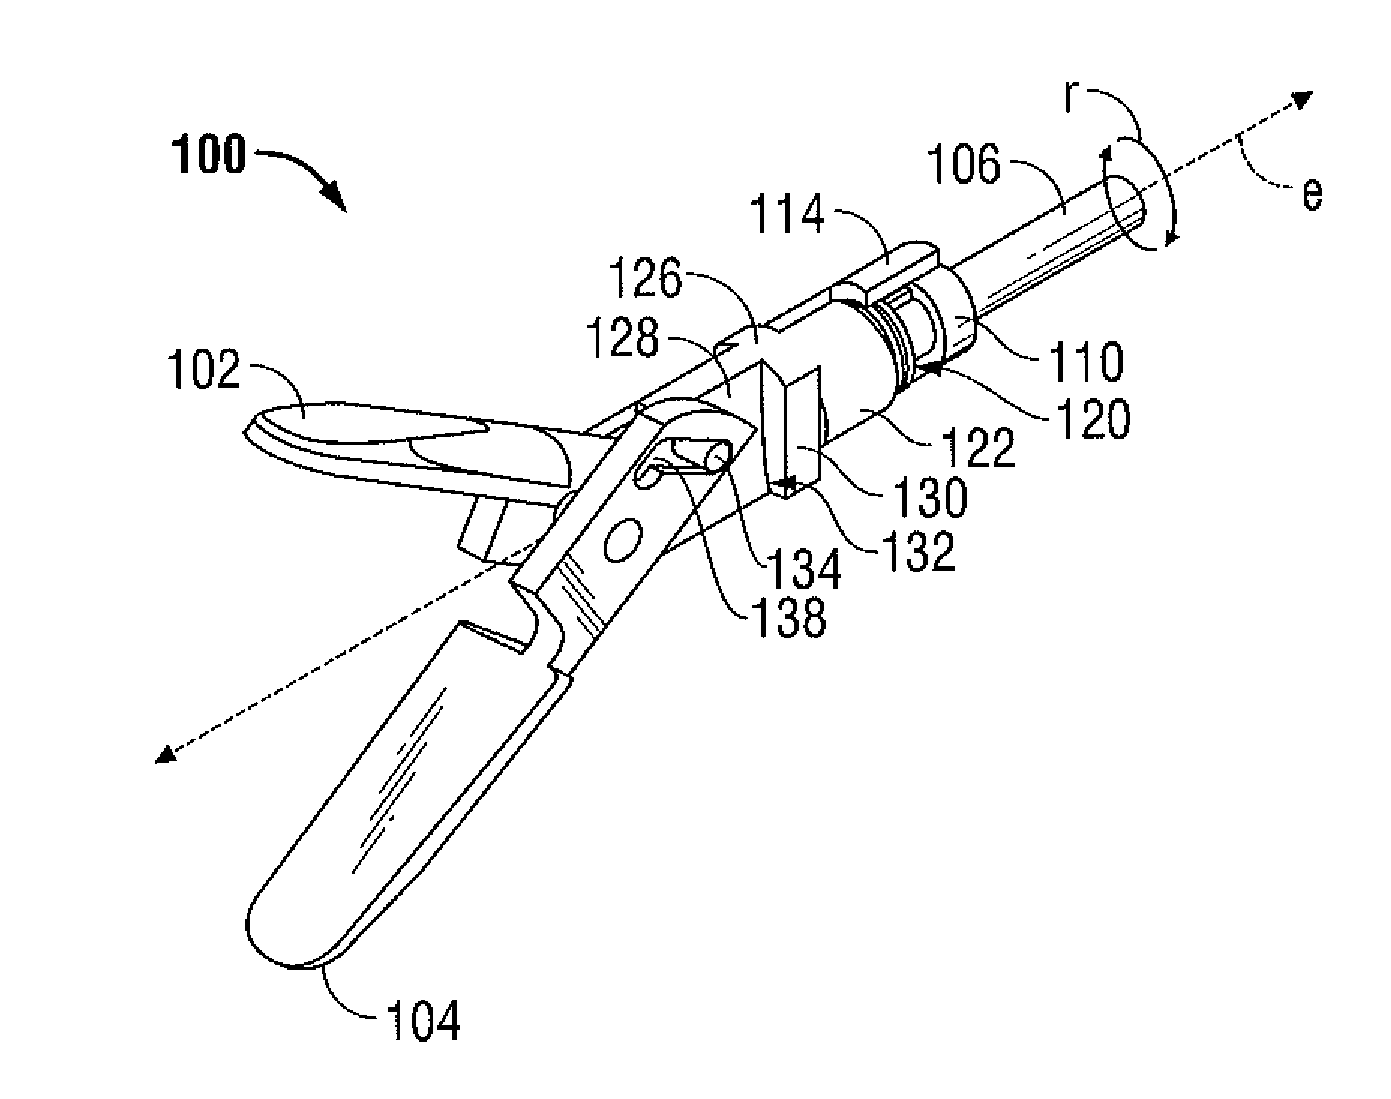 Method of transferring pressure in an articulating surgical instrument